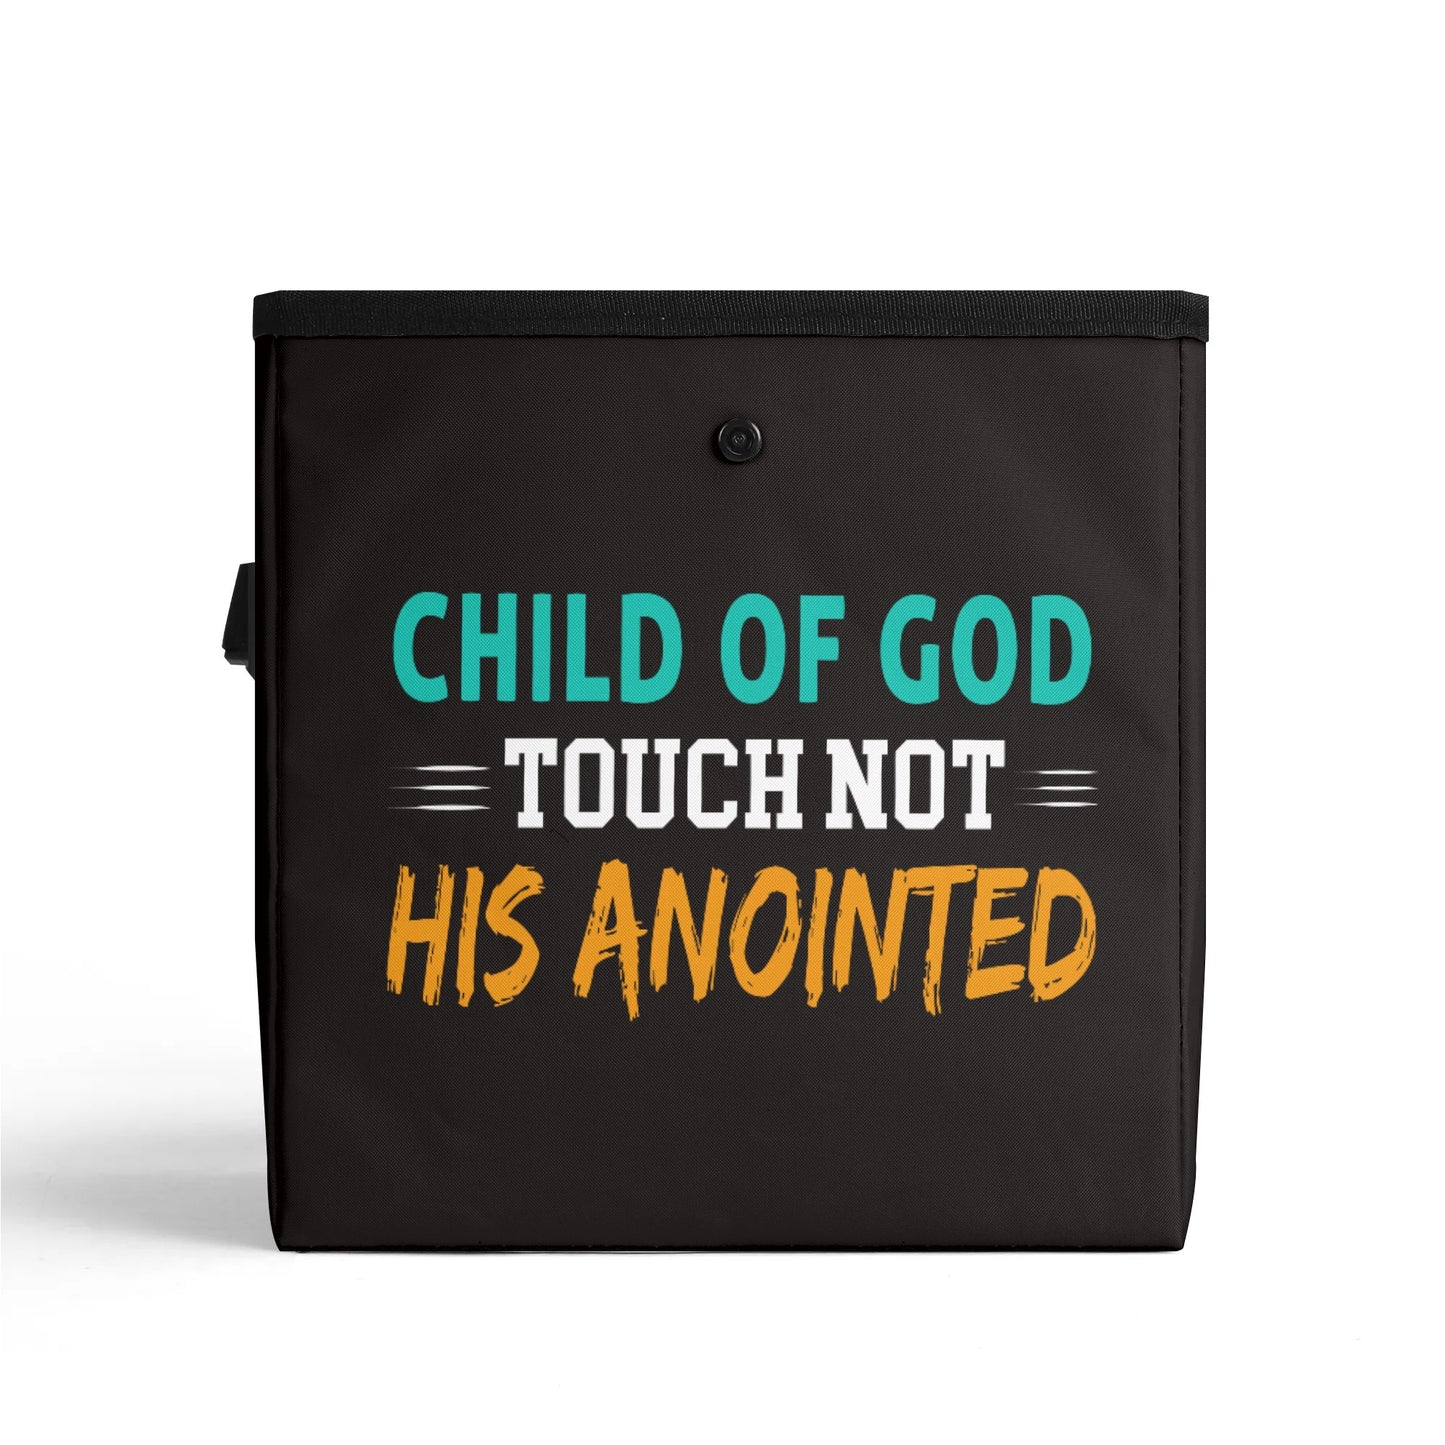 Child Of God Touch Not His Anointed Hanging Storage Trash Car Organizer Bag Christian Car Accessories popcustoms